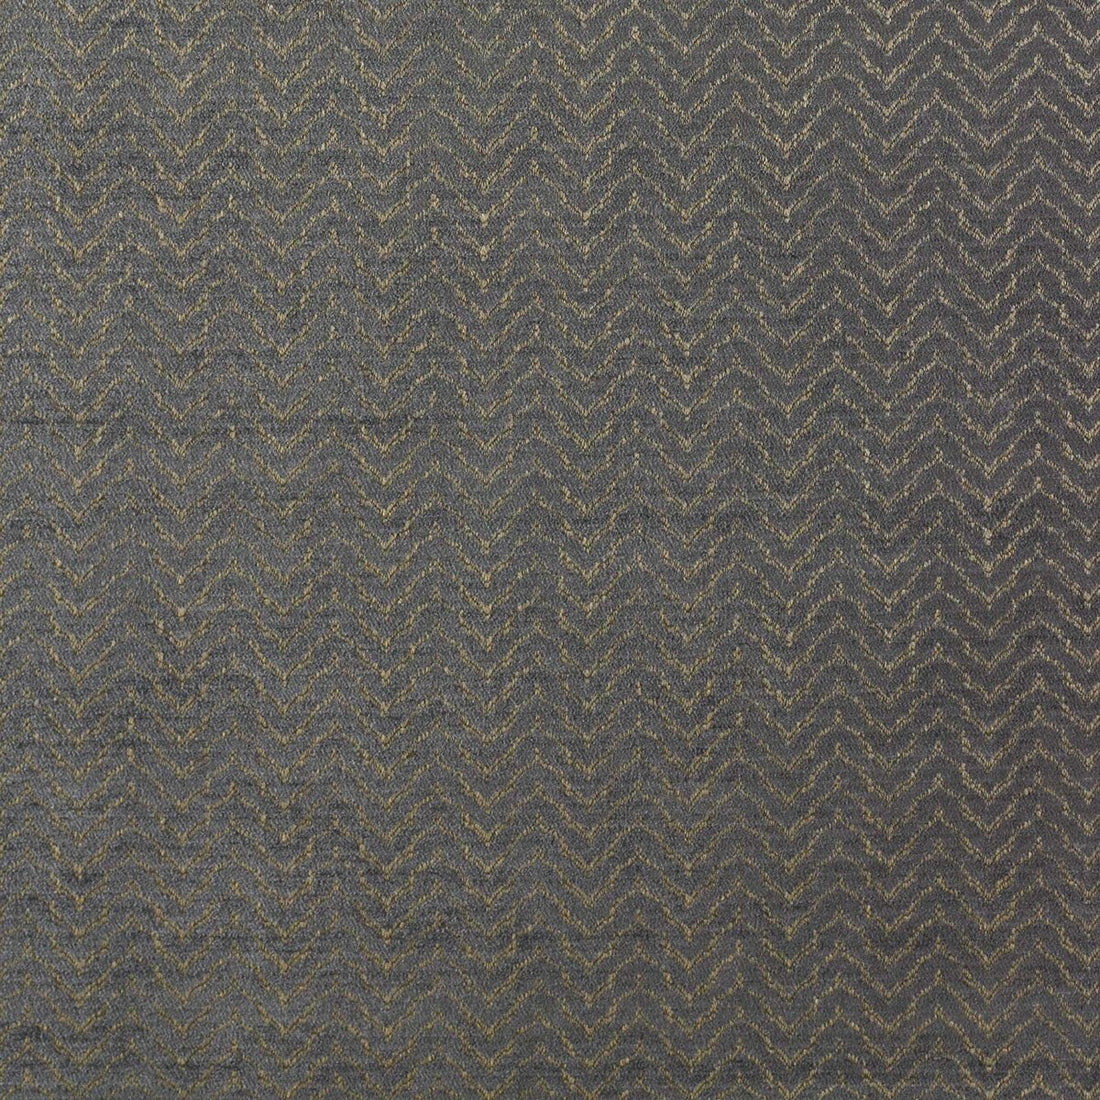 Sella fabric in gris color - pattern GDT5180.010.0 - by Gaston y Daniela in the Lorenzo Castillo II collection